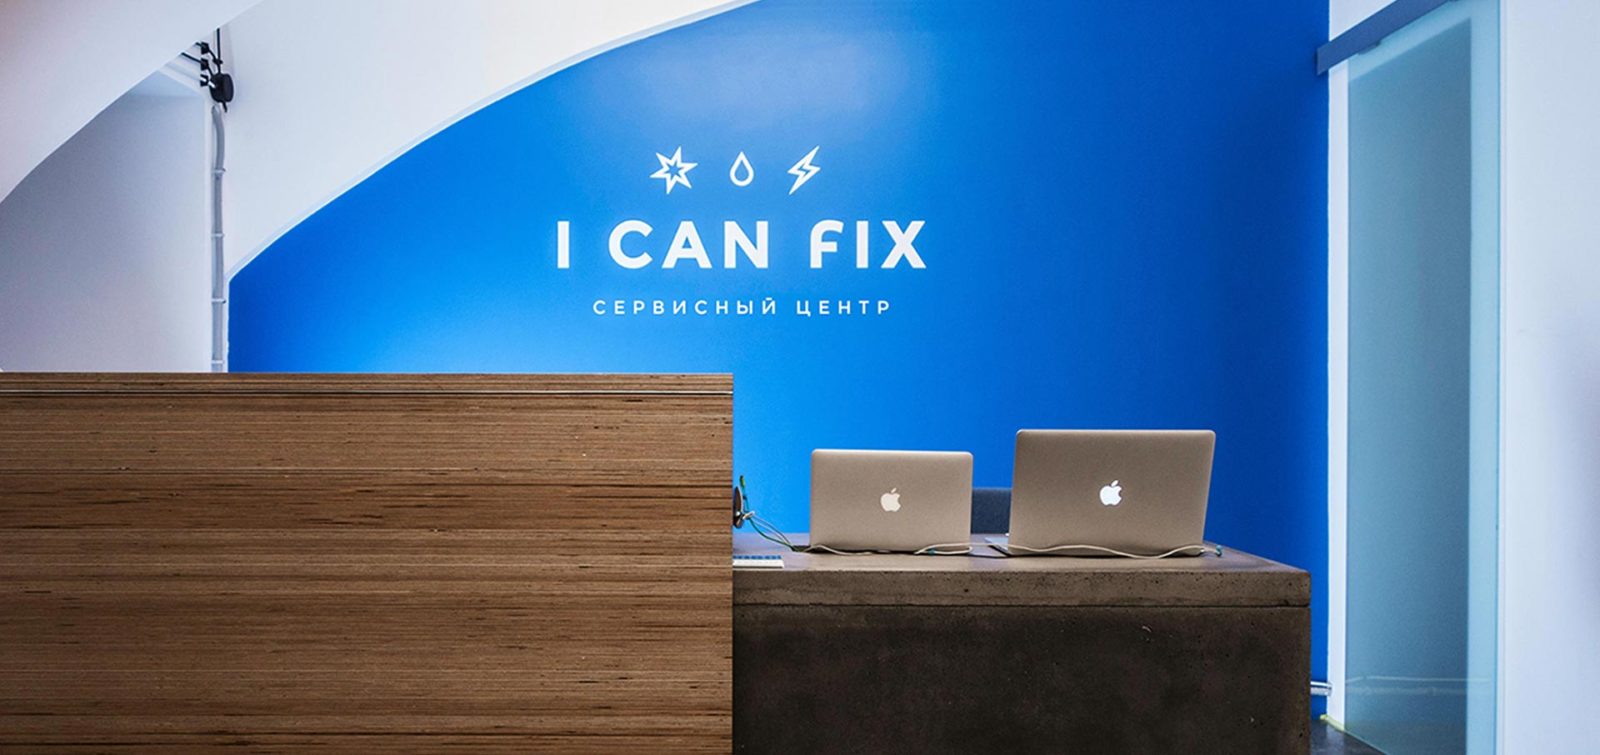 Can you fix my. Цех Apple. I can Fix, Санкт-Петербург. Fly Lab СПБ. Can Fix Санкт-Петербург большая Конюшенная.